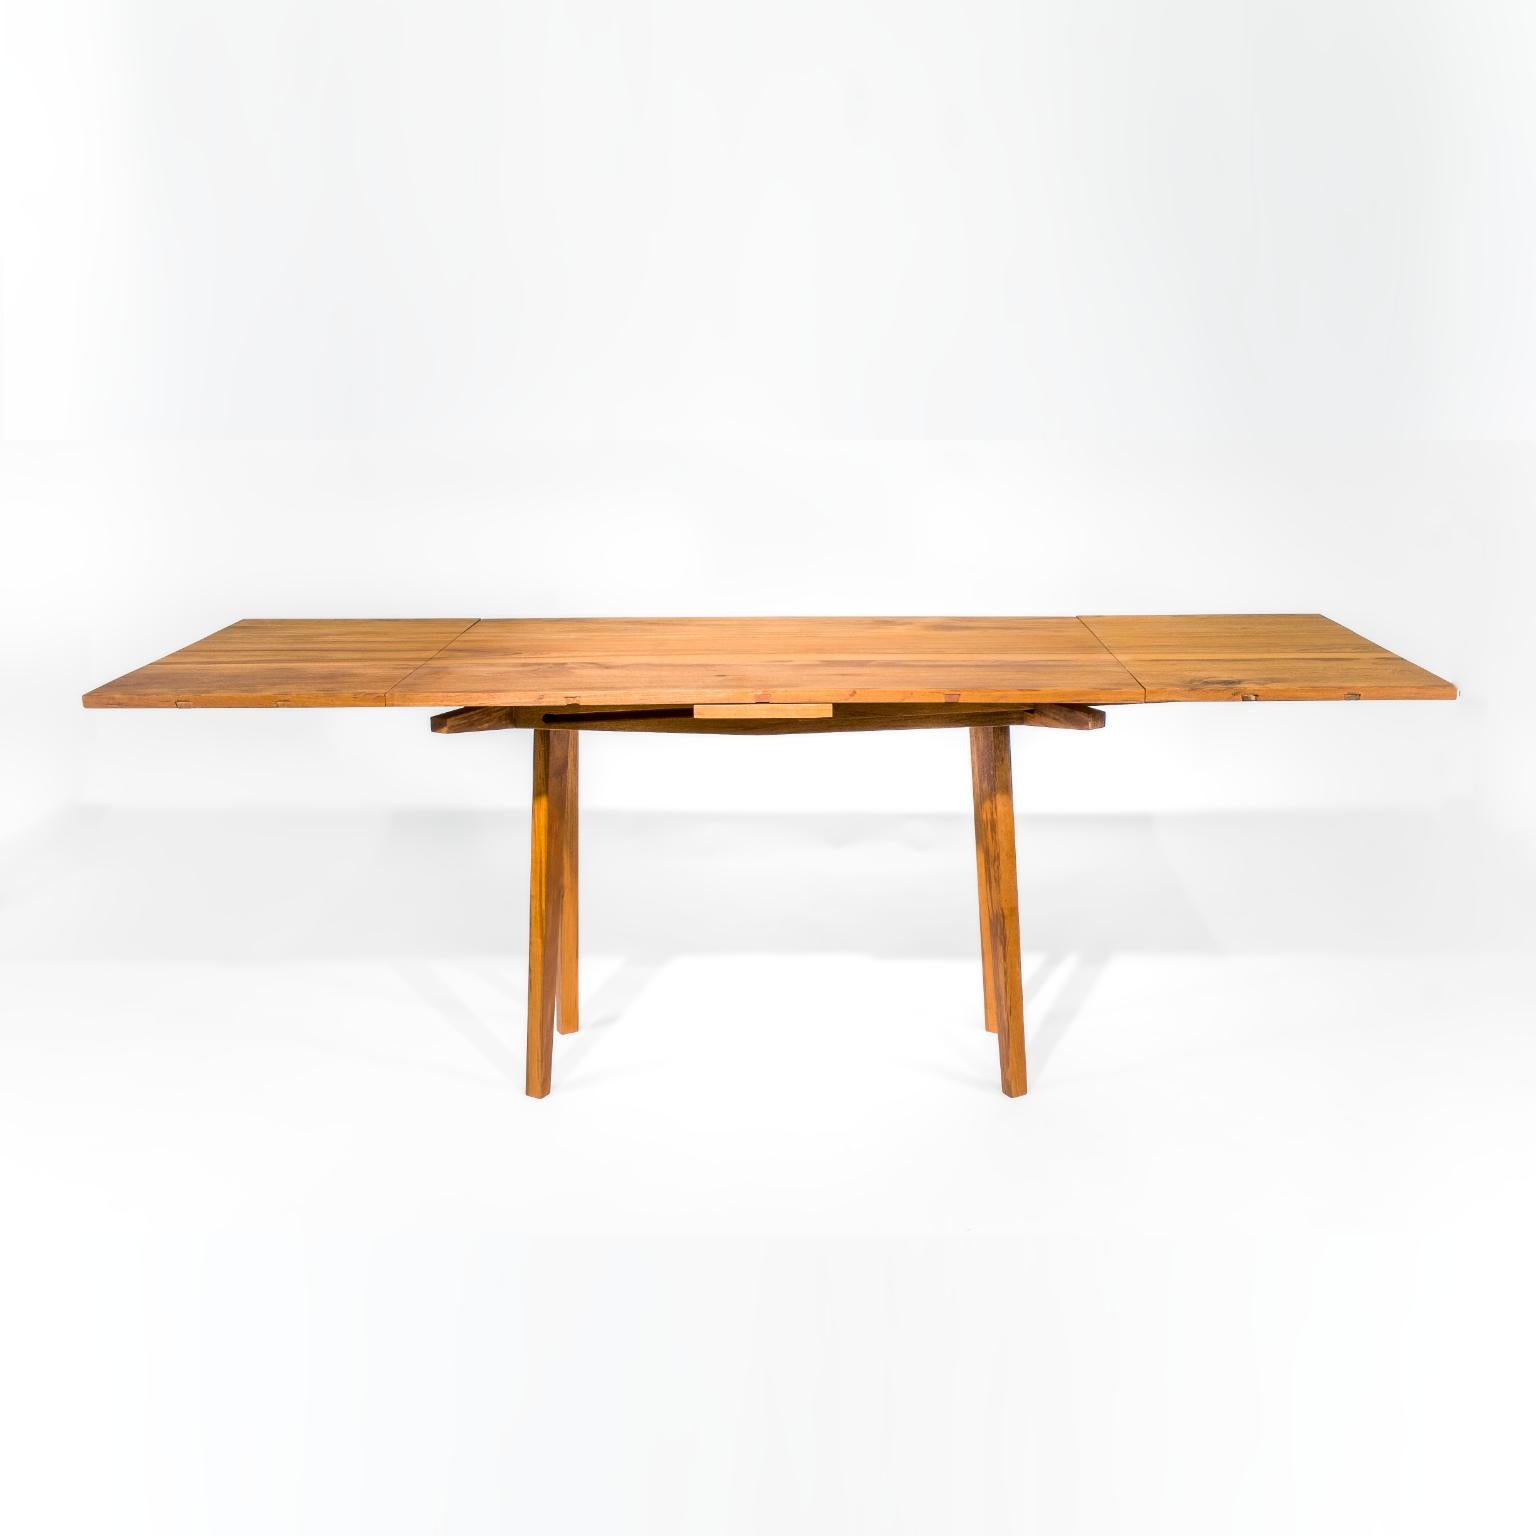 During a residence in Kyoto, Japan, studying Japanese wood joinery, One of Figure Grounds' Founding Partners, Tyler Putnam, struck inspiration for this table. There was never enough space to host dinner parties in tiny apartments in modern